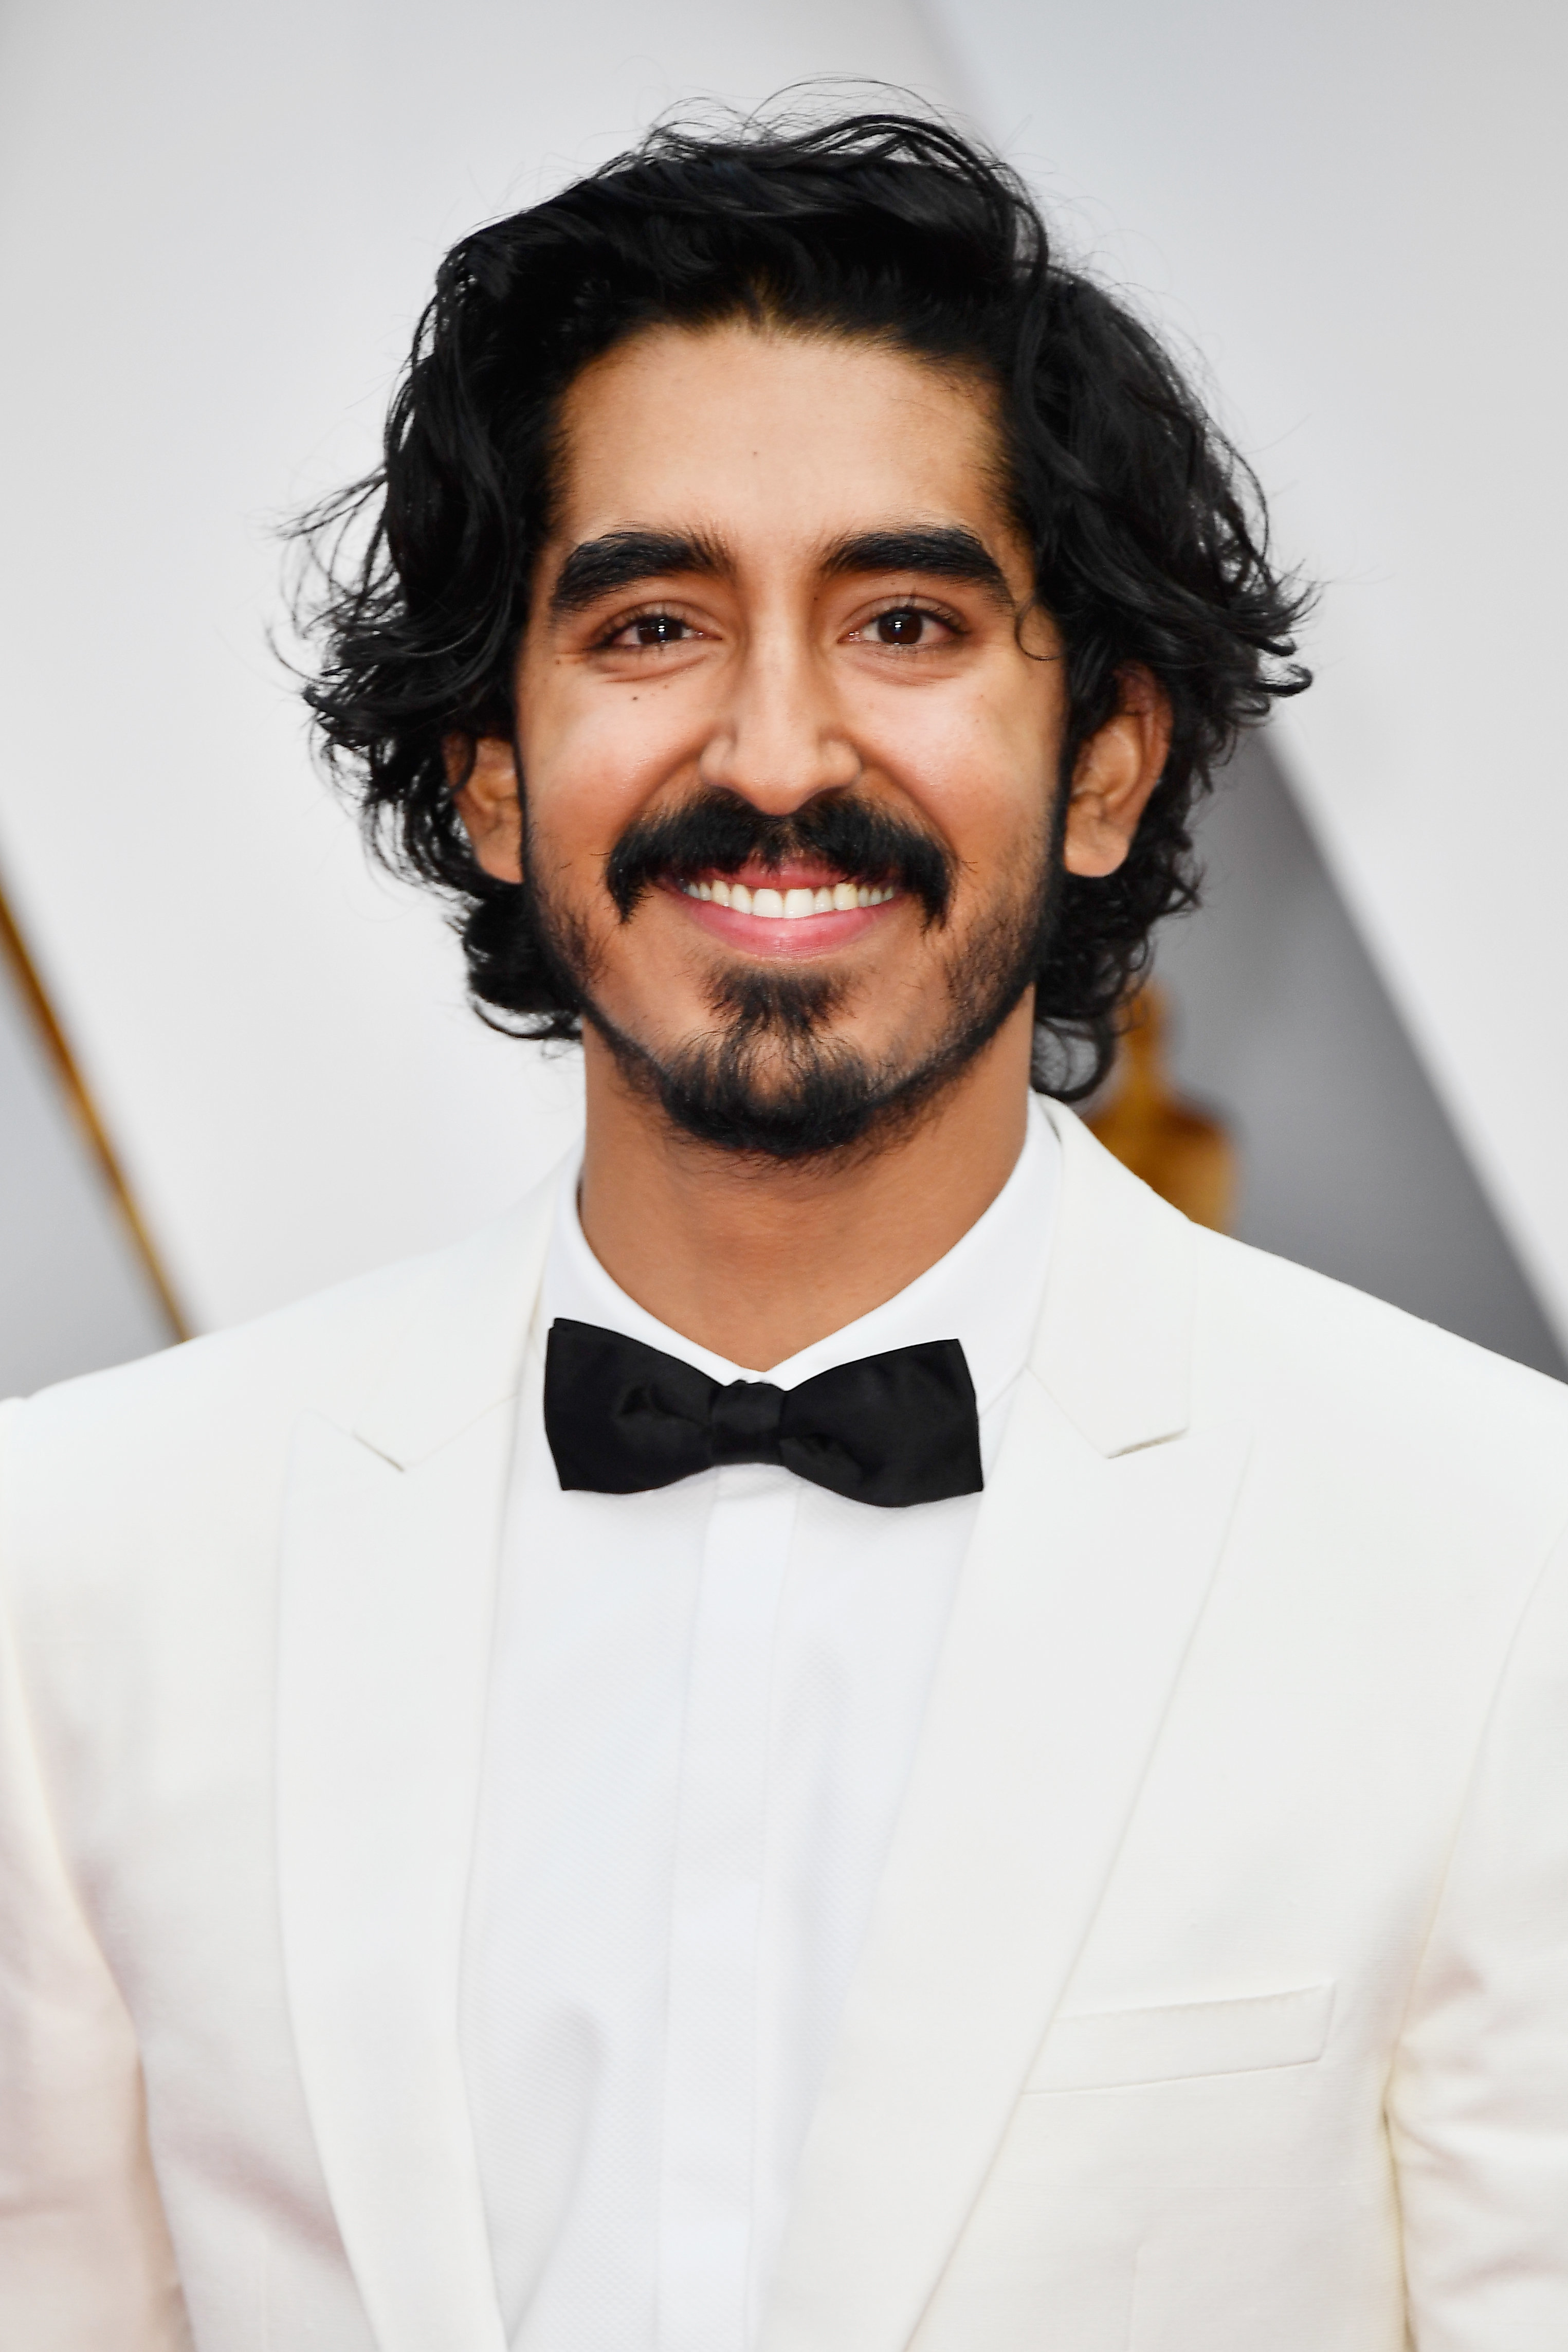 Pictured Dev Patel  You Better Believe Hollywoods Sexiest Men Came Out  in Full Force at the Oscars  POPSUGAR Celebrity Photo 23